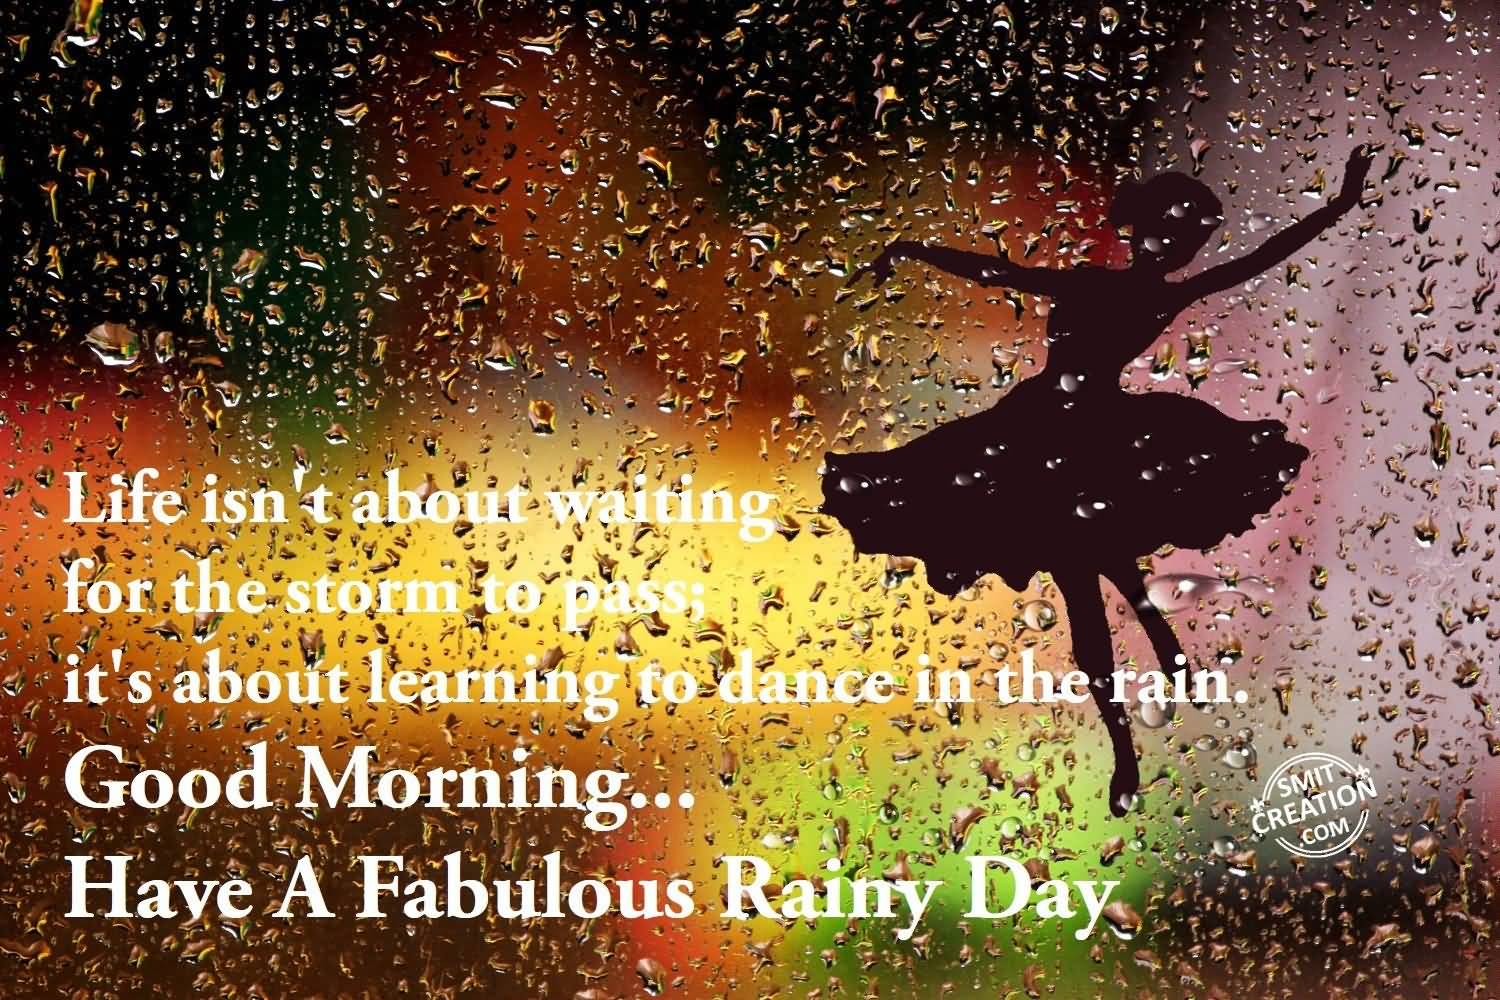 Good Morning Have A Fabulous Rainy Day